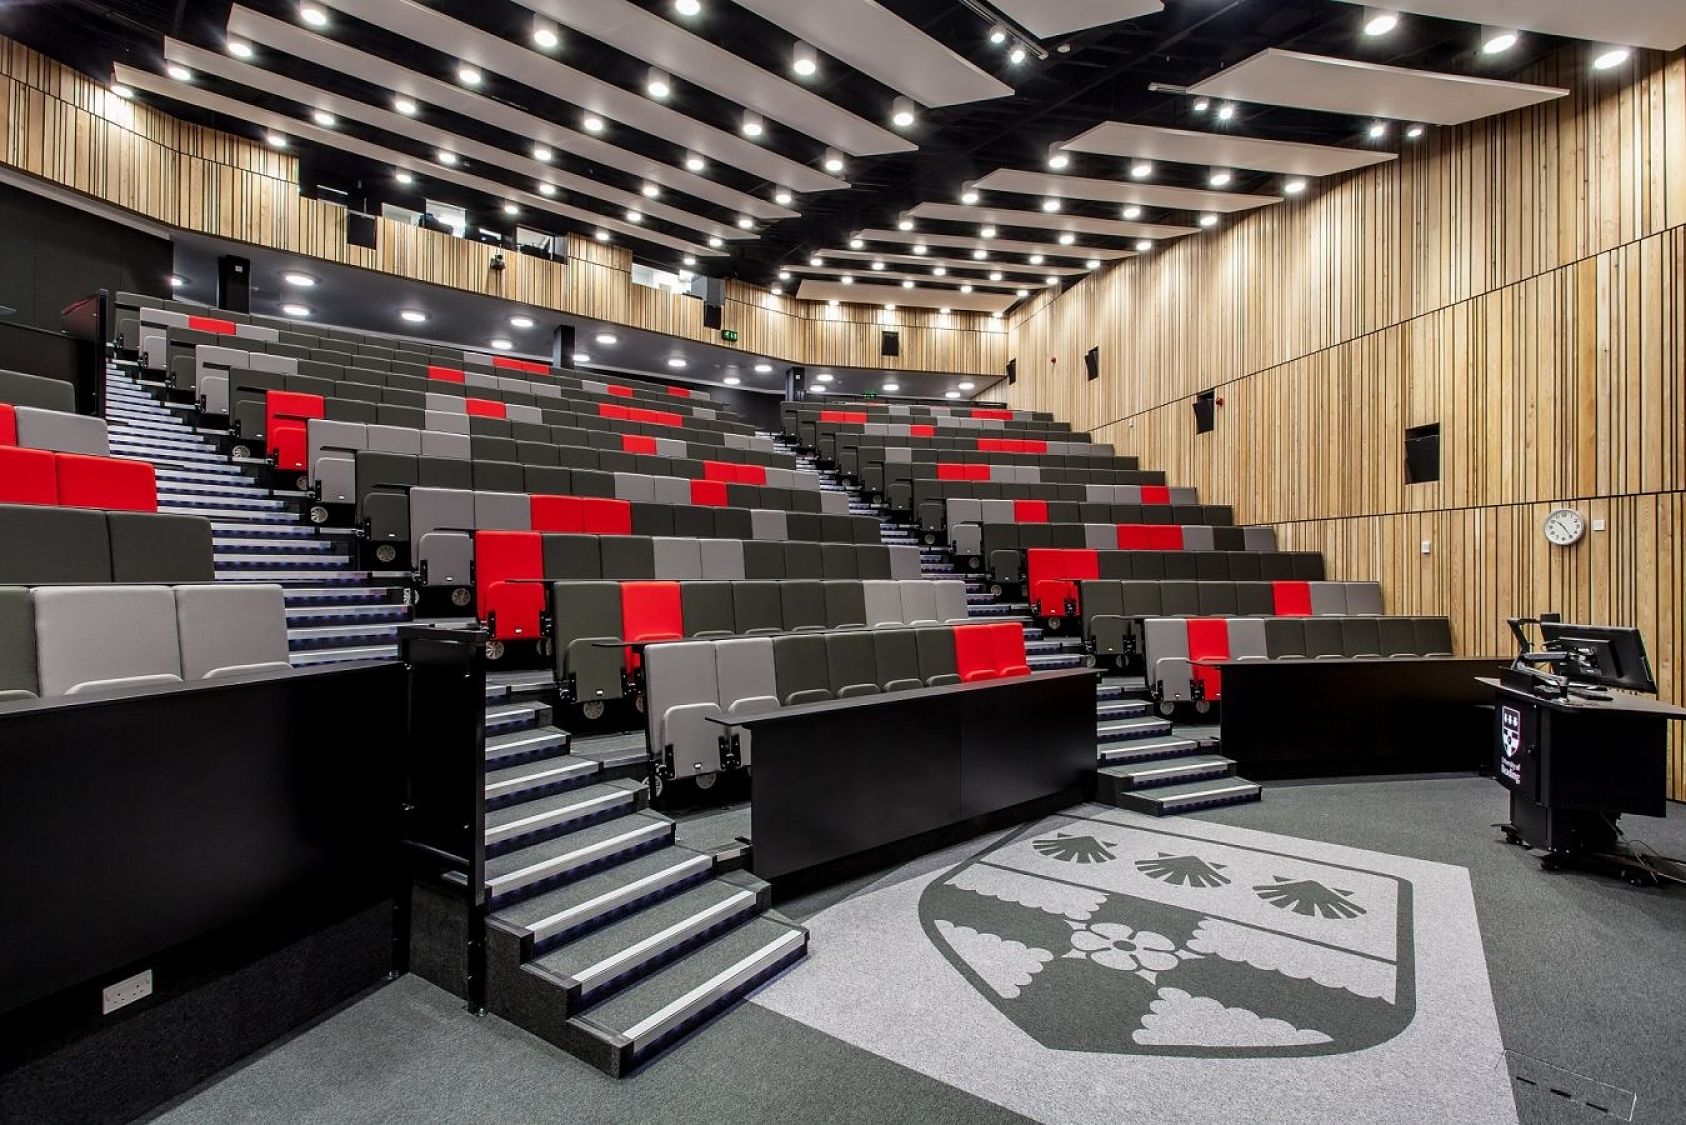 A photo of Palmer lecture theatre seating